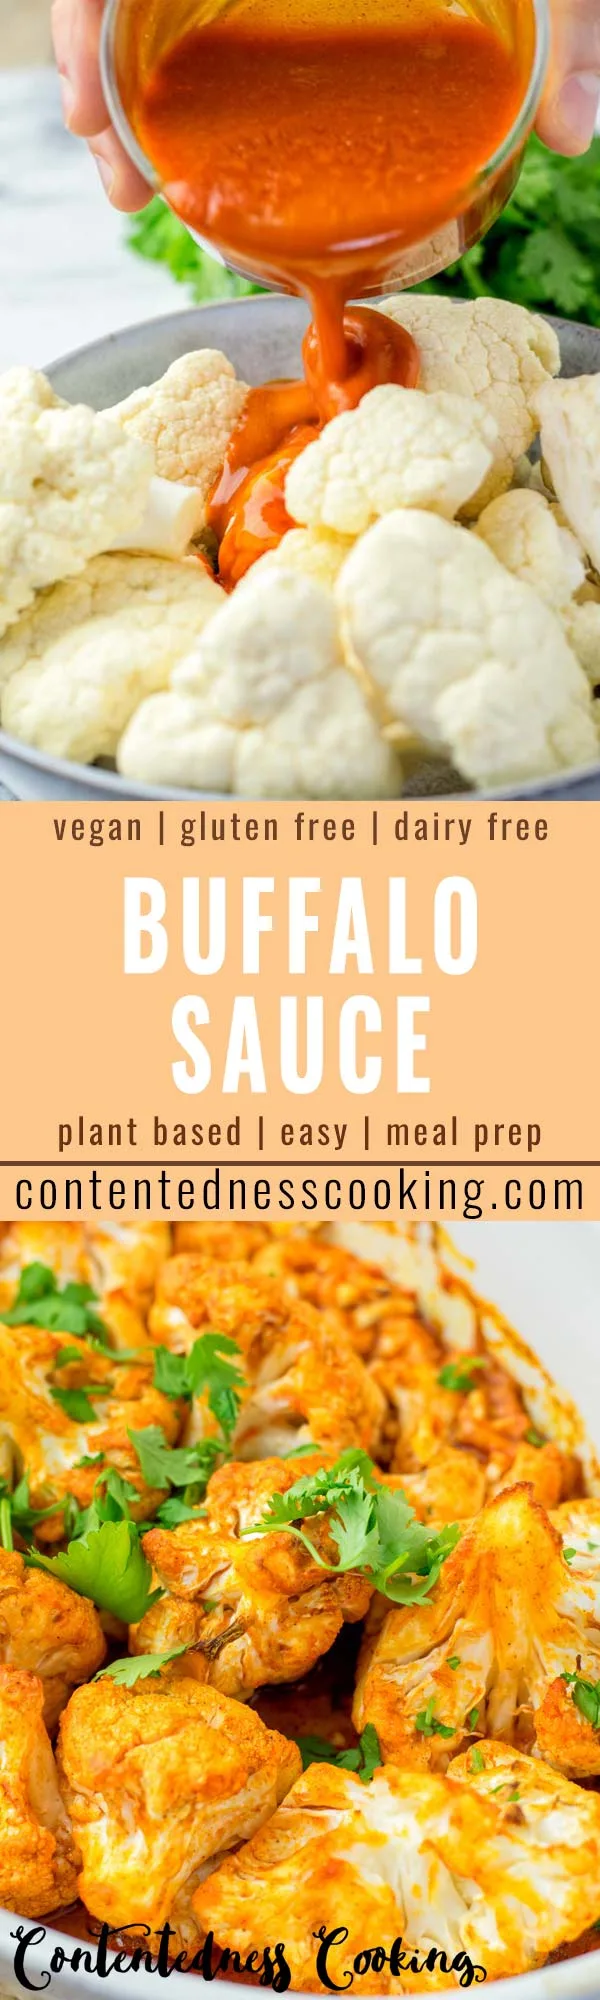 This Buffalo Sauce is homemade and so delicious for cauliflower wings, dipping sauce, chickpea nuggets and done in no time. No one would ever guess it is vegan and entirely gluten free. Perfect for dinner, lunch, meal prep, budget friendly that the whole family will love. #vegan #dairyfree #glutenfree #buffalosauce #chckpeanuggets #cauliflowerwings #dinner #lunch #budgetmeals #mealprep #contentednesscooking #dippingsauce #vegetarian #familymeals #partyfood 